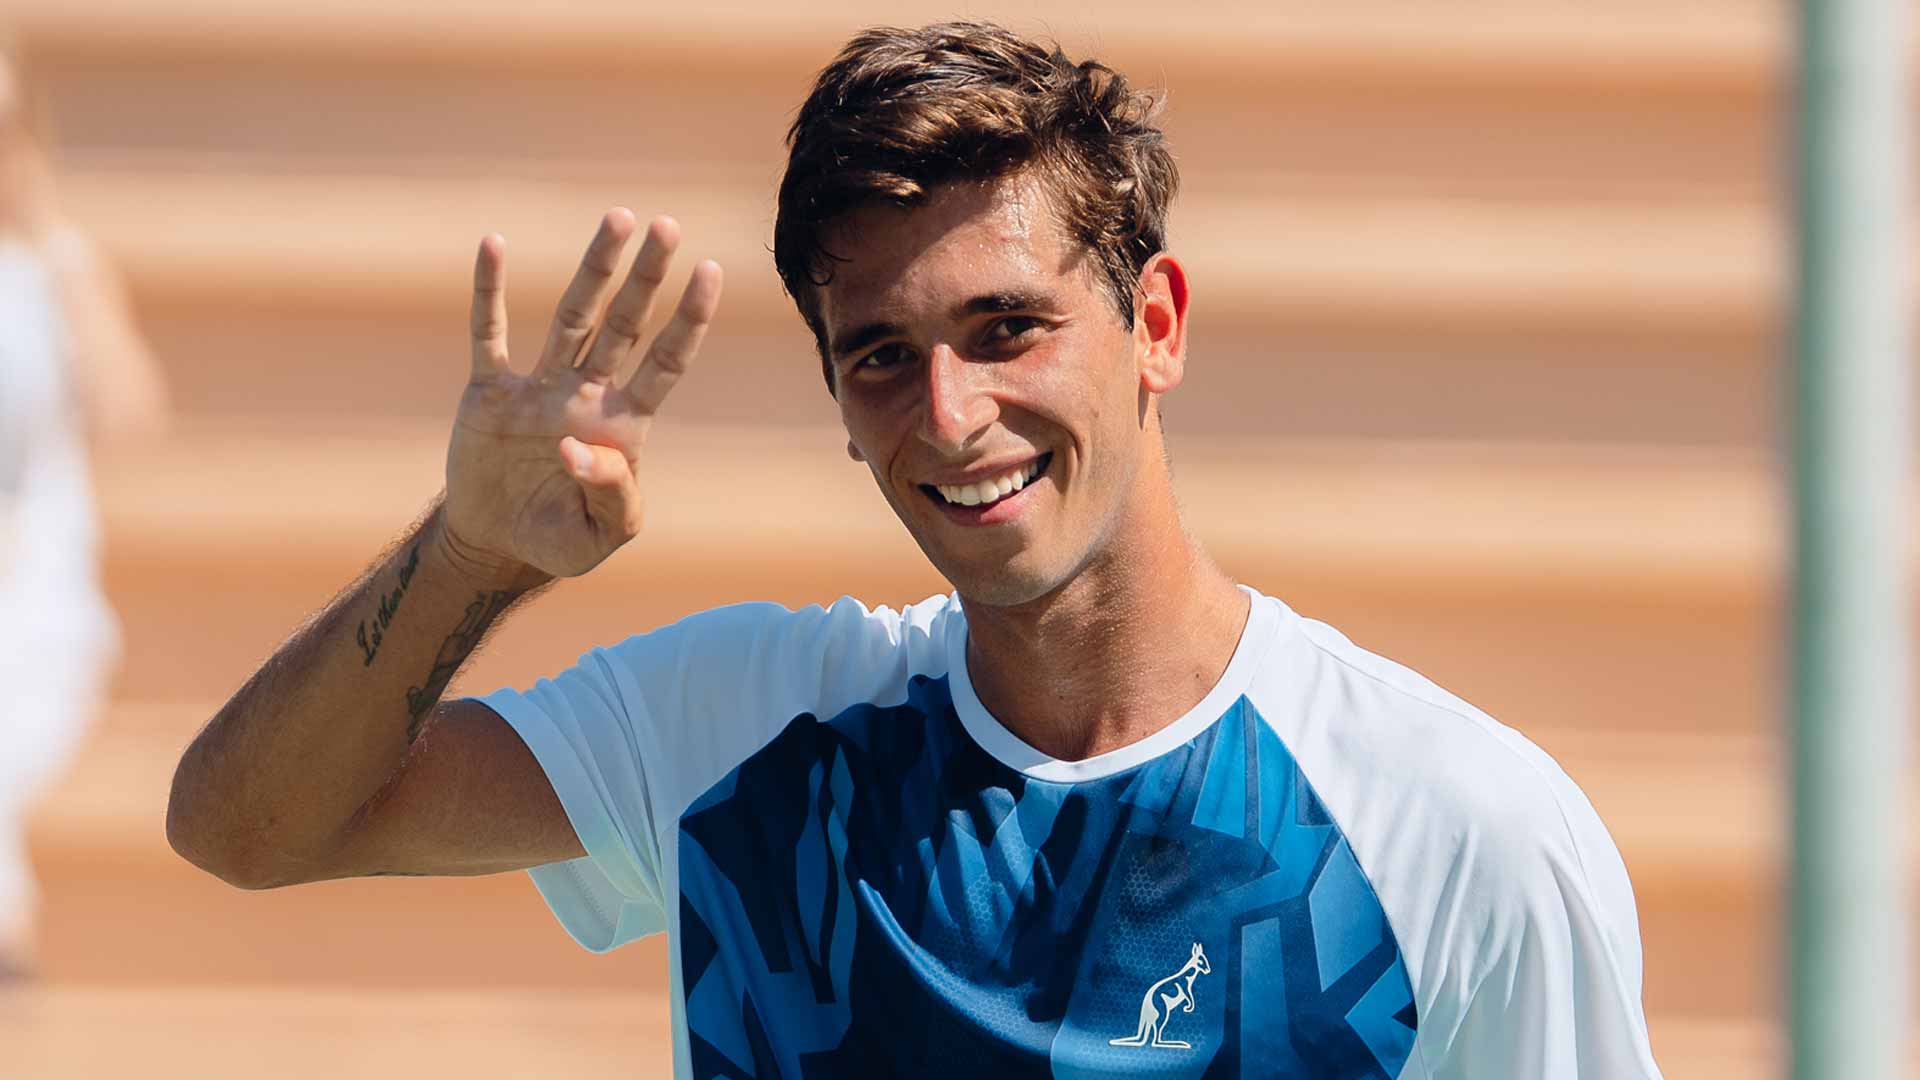 Matteo Gigante is a four-time ATP Challenger Tour champion.